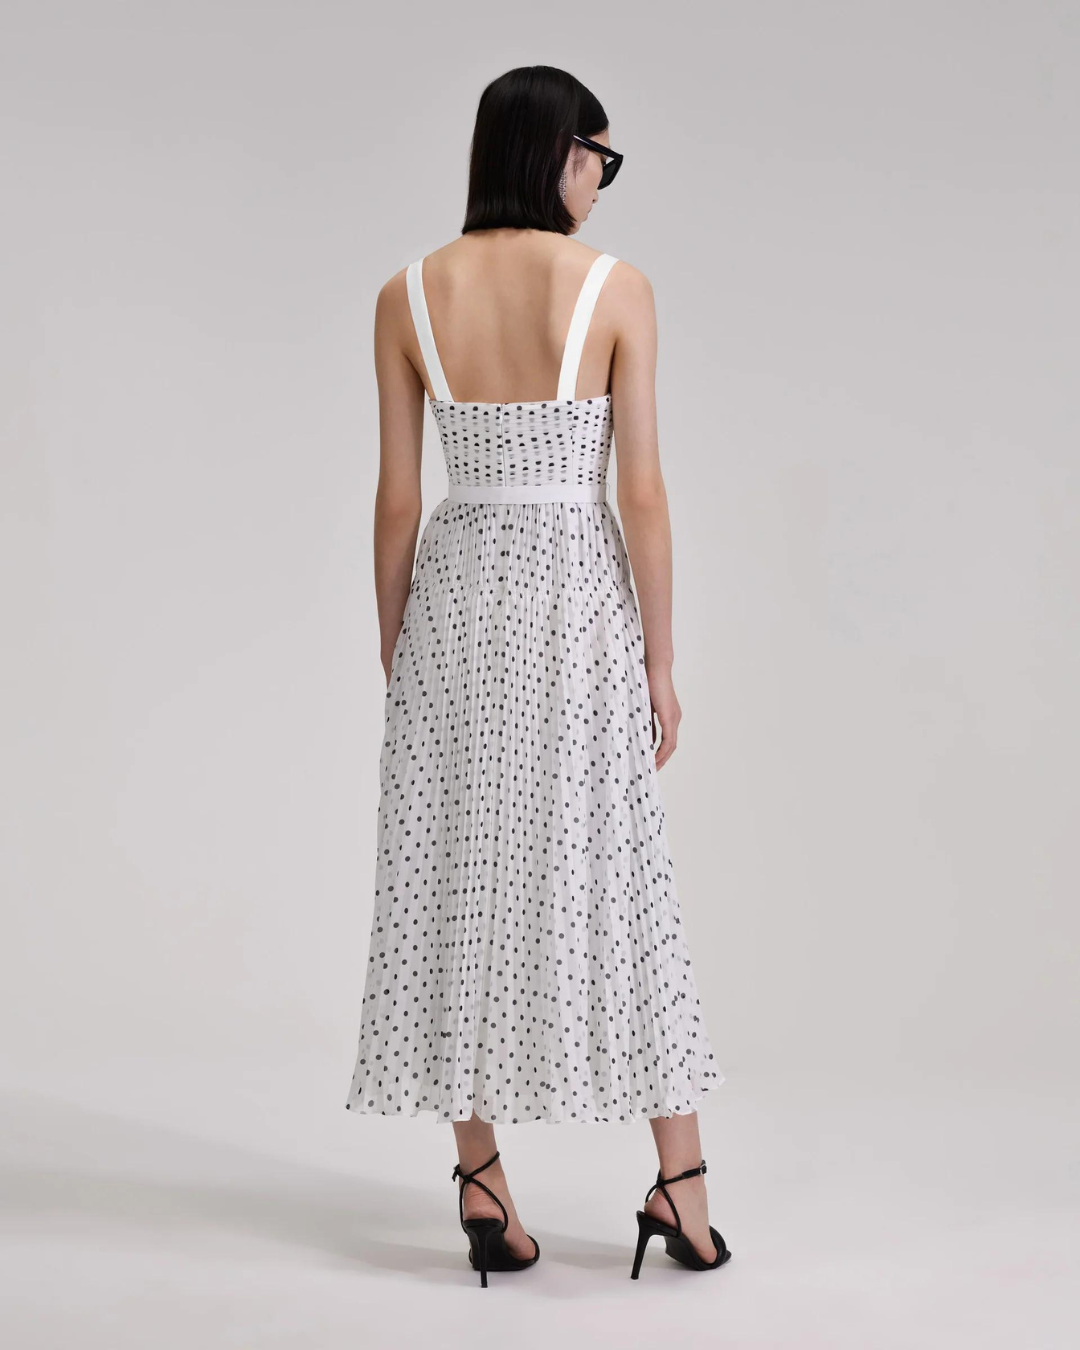 White and black polka dot midi dress with thin straps and fitted bodice with pleating throughout